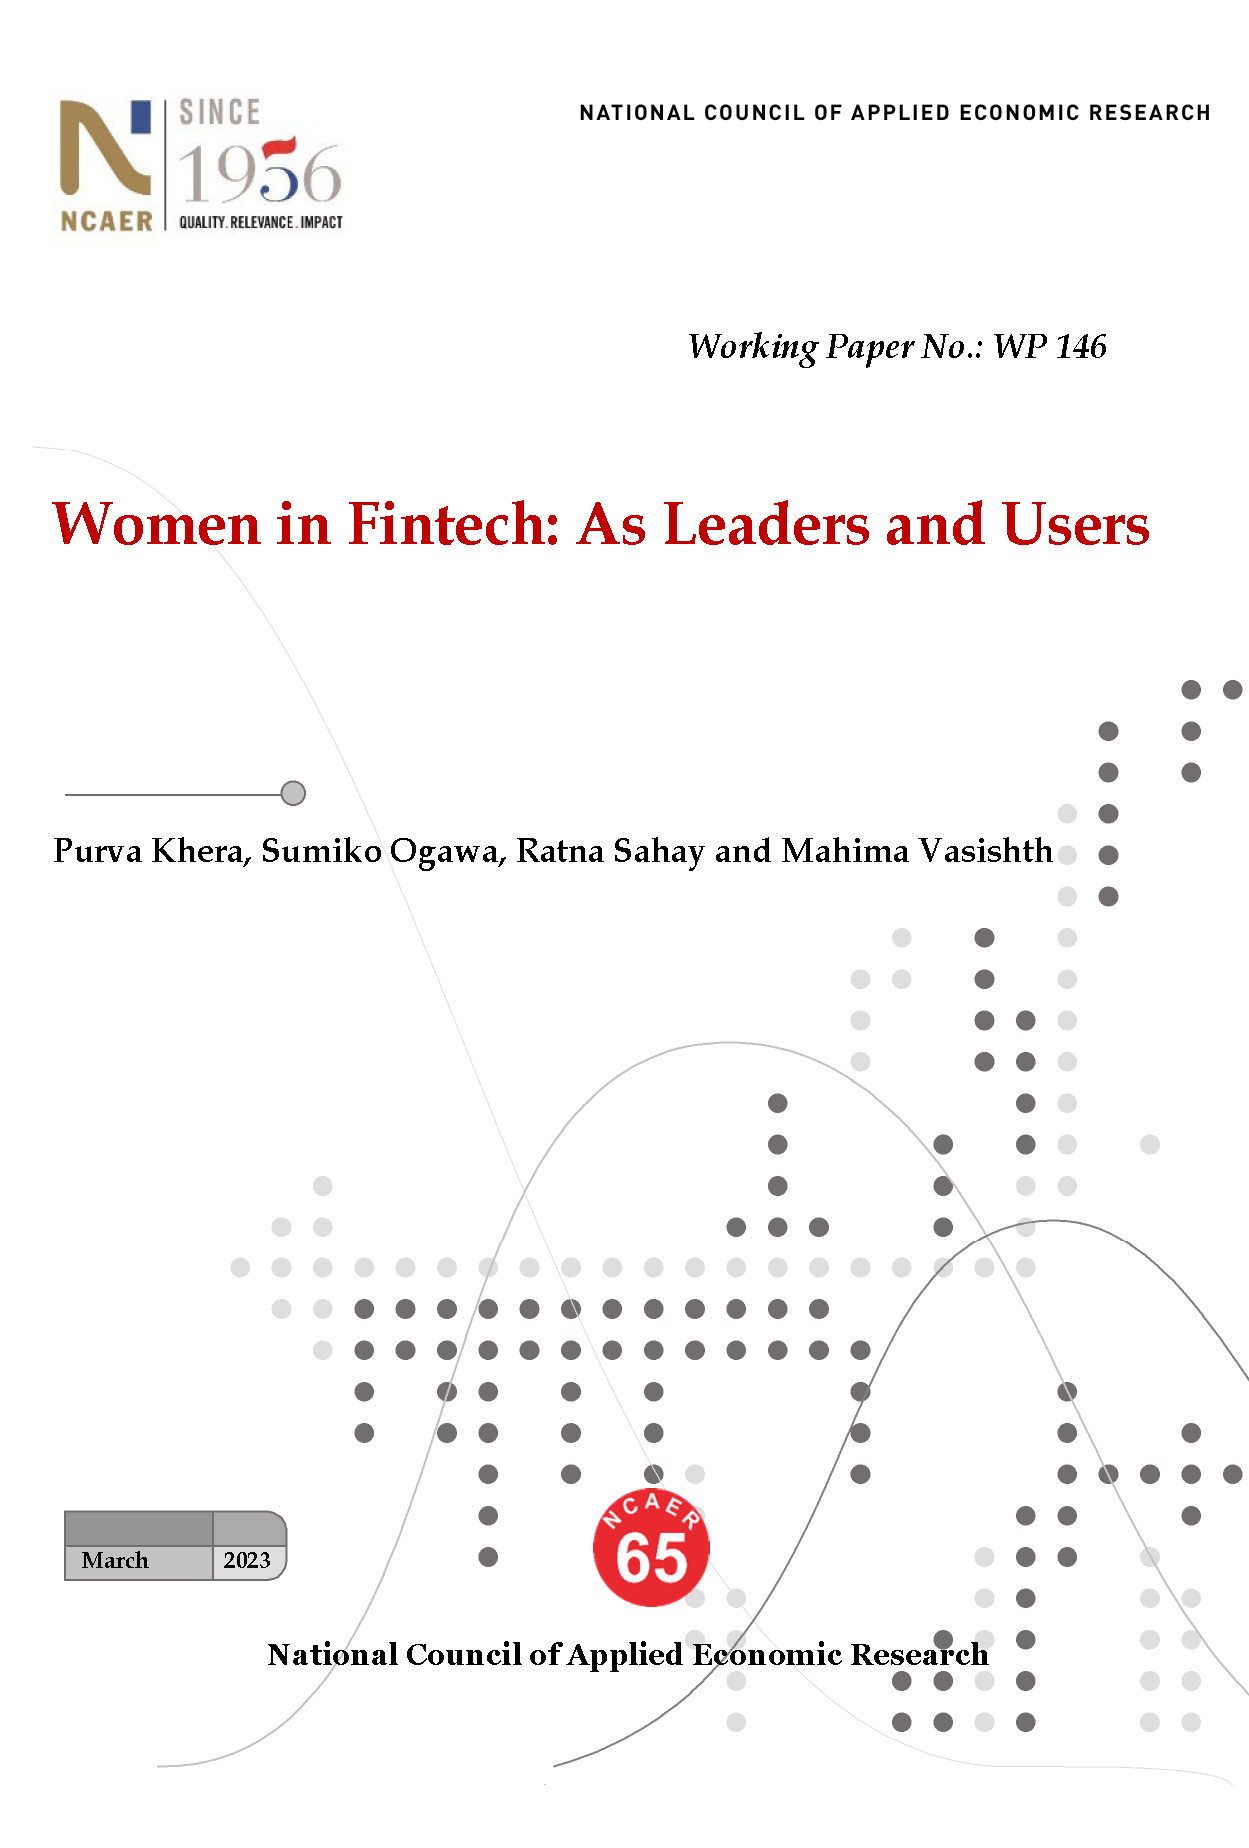 Women in Fintech: As Leaders and Users